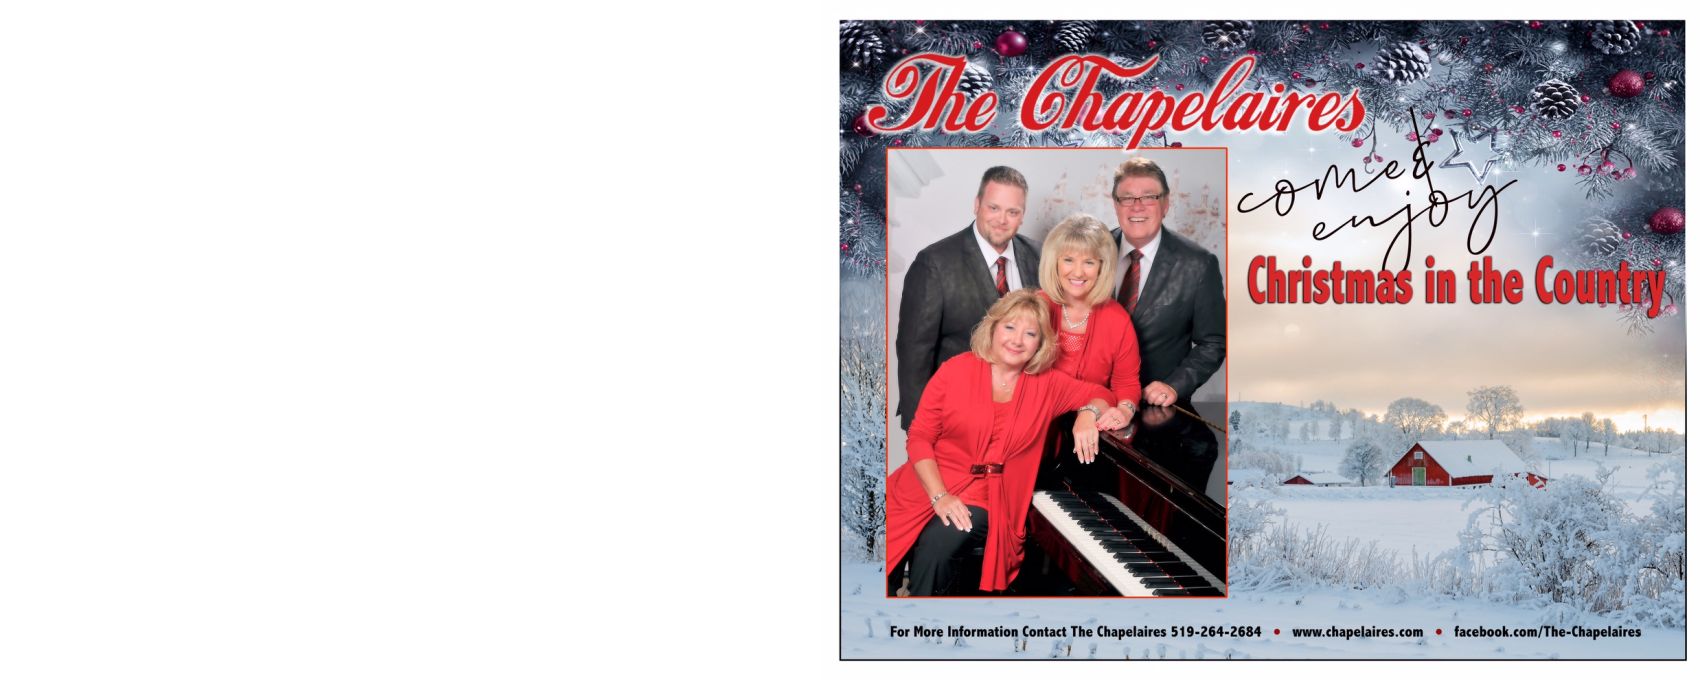 Sunday Evening, Dec. 17, 2023, @ 6:30 p.m. The Chapelaires quartet is made up of&nbsp;Phil Pugh, Myrna Hand, Sheila Jackson&nbsp;and&nbsp;David Jackson.&nbsp; We all love the Lord and sing for His Glory!